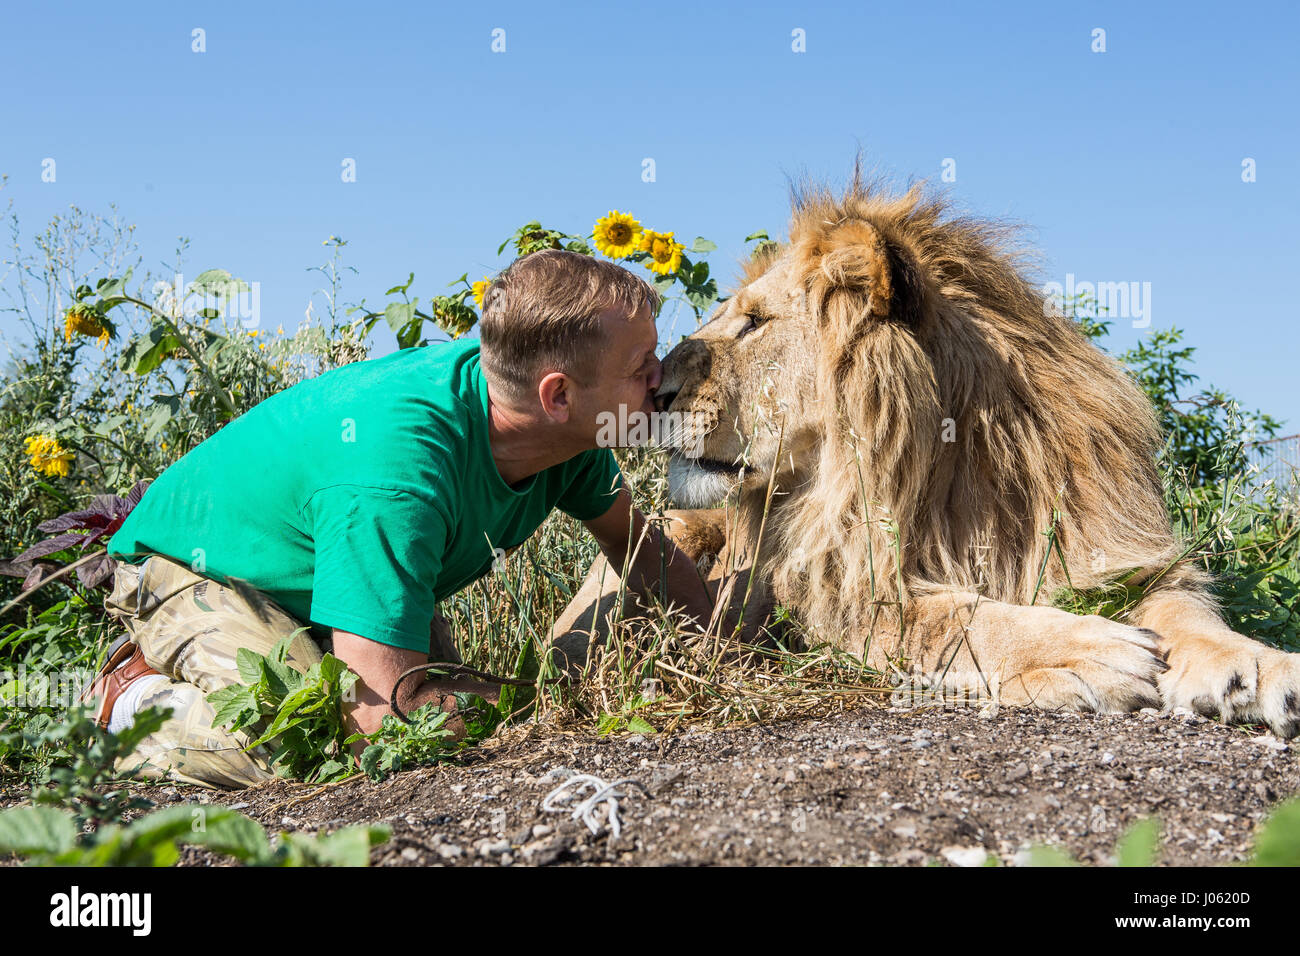 Oleg Zubkov kissing a lion. STUNNING images showing ferocious lions and fearless humans sitting on top of each other in a field have been captured by one surprised photographer. The surreal pictures show the 418-pound lions welcoming their human companions as they happily pose for selfies, kiss each other on the mouth and one white lion even reaches out a helping paw to a man swimming in a pond.  Other images show the lions affectionately greeting people from their cars and in one incredible image, a man bravely puts his arm in the beast’s mouth to pose for the camera. The spectacular images w Stock Photo